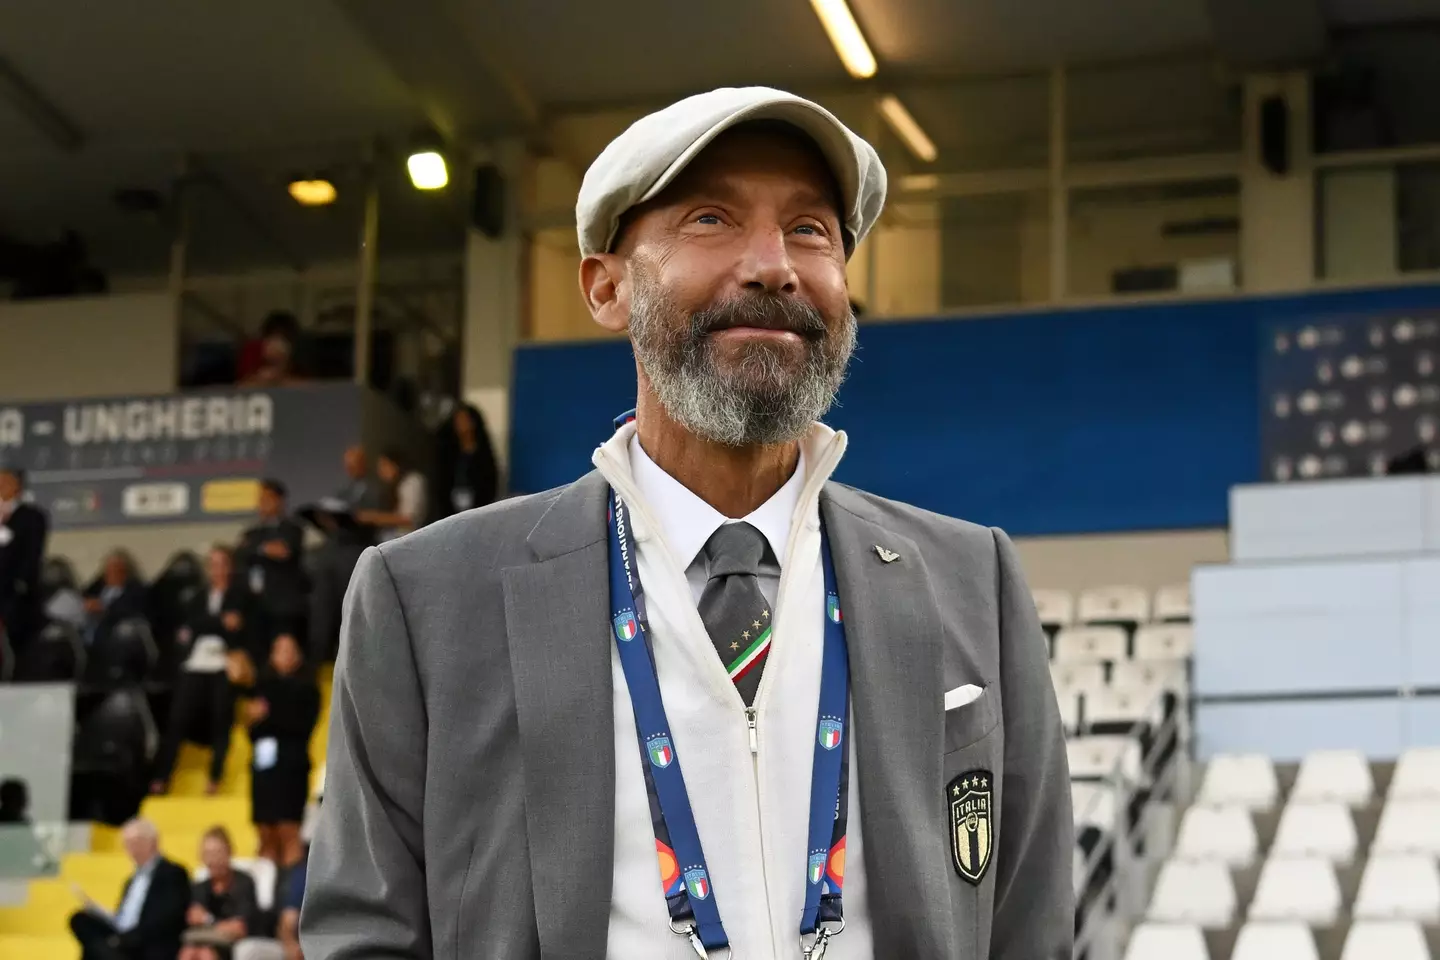 Vialli died after being diagnosed with cancer in 2021.